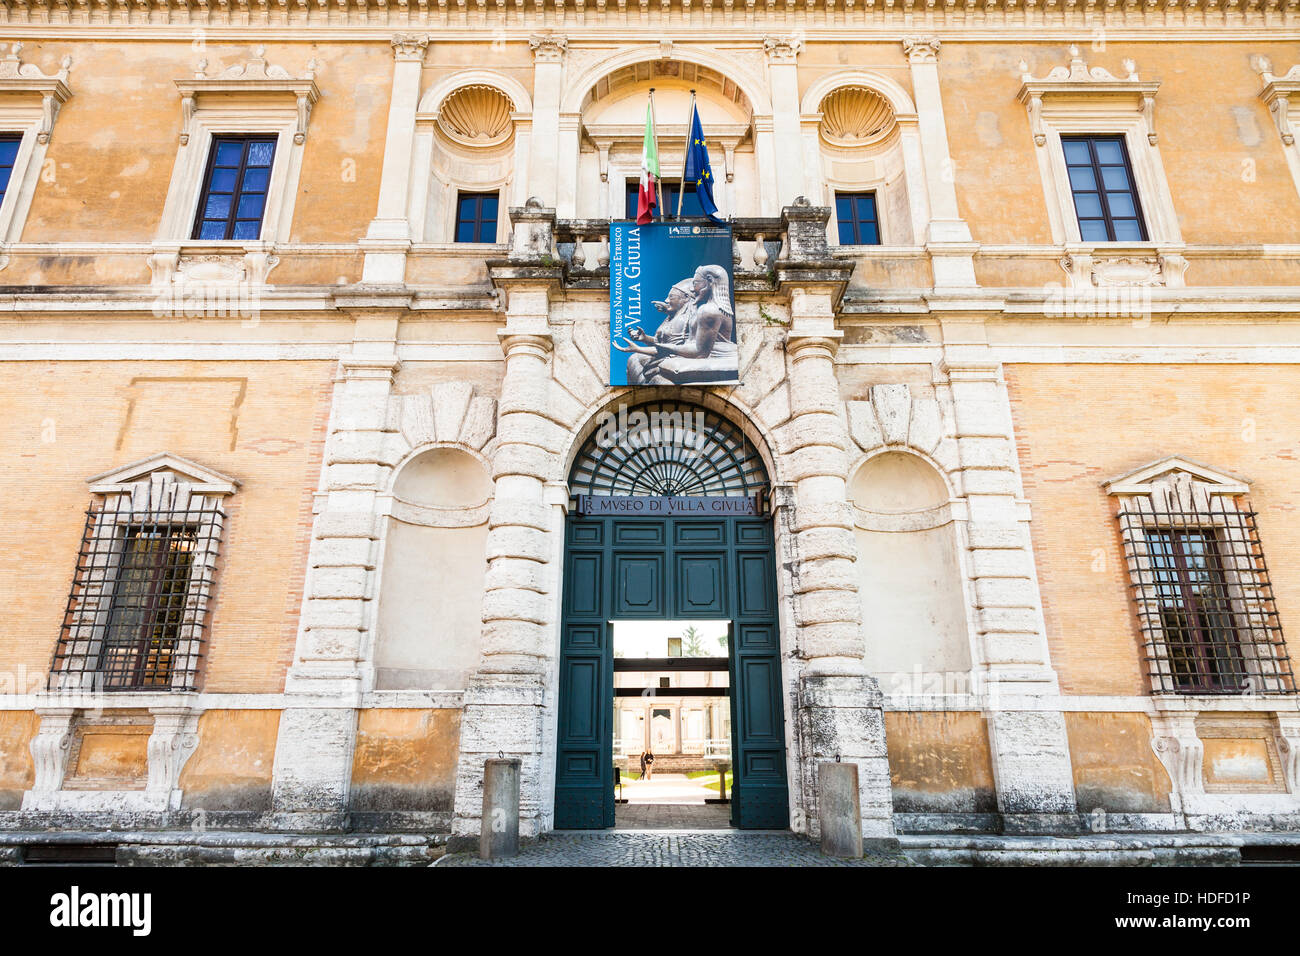 ROME, ITALY - NOVEMBER 1, 2016: front view of Villa Giulia, houses Museo Nazionale Etrusco (National Etruscan Museum), big collection of Etruscan art Stock Photo